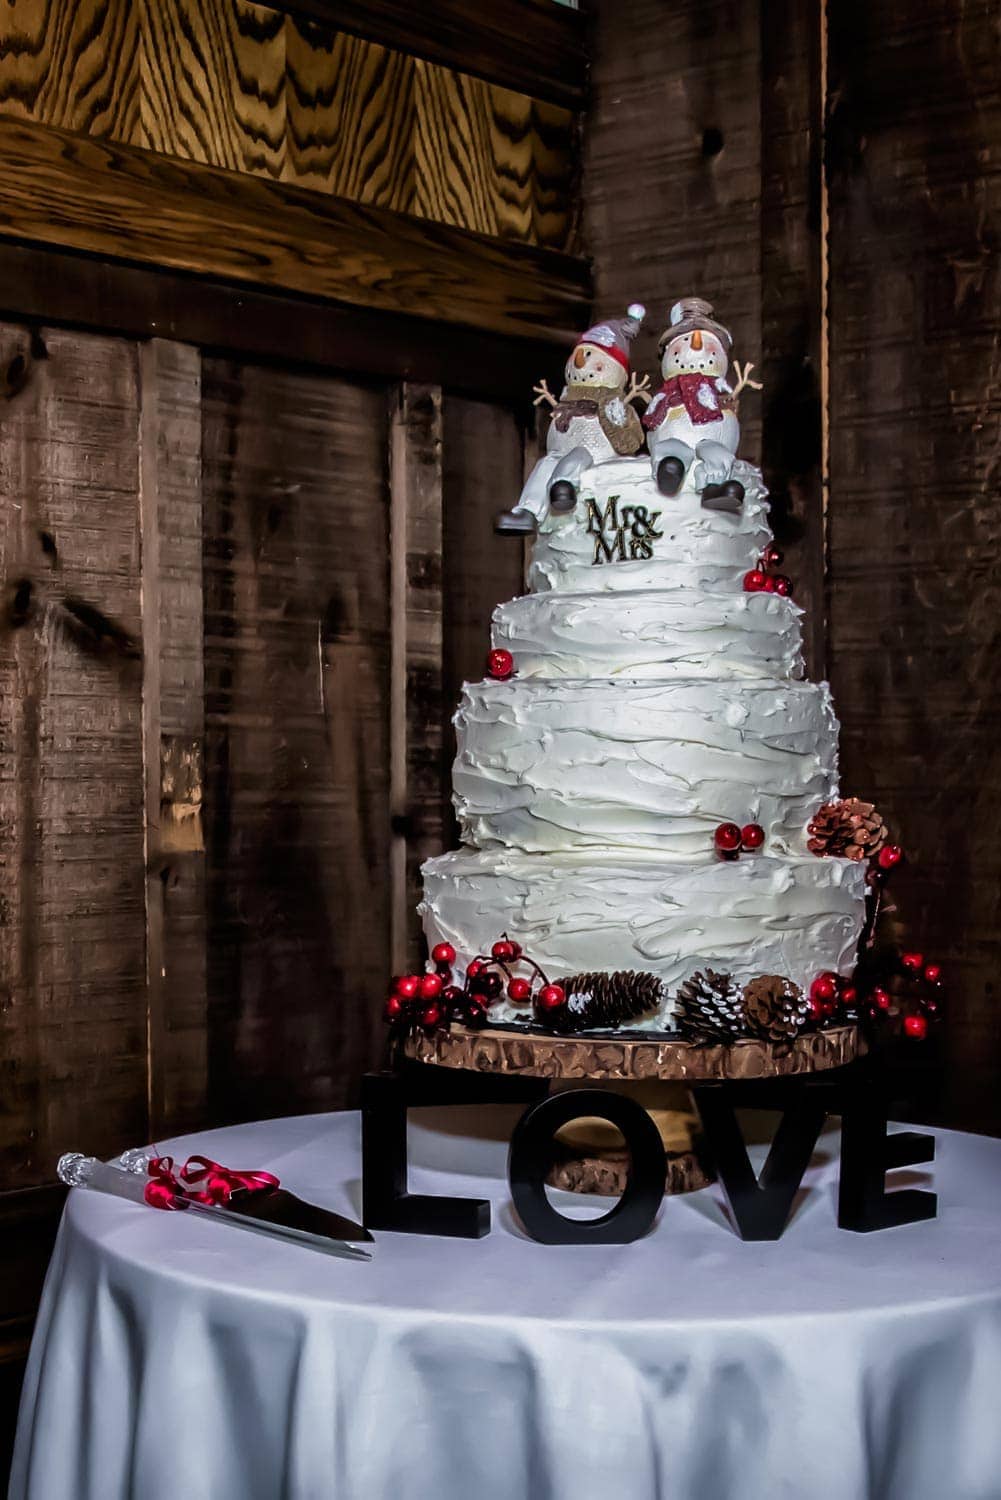 An awesome winter themed wedding cake with snowman wedding cake toppers at a Lower Deck Tap Room wedding.